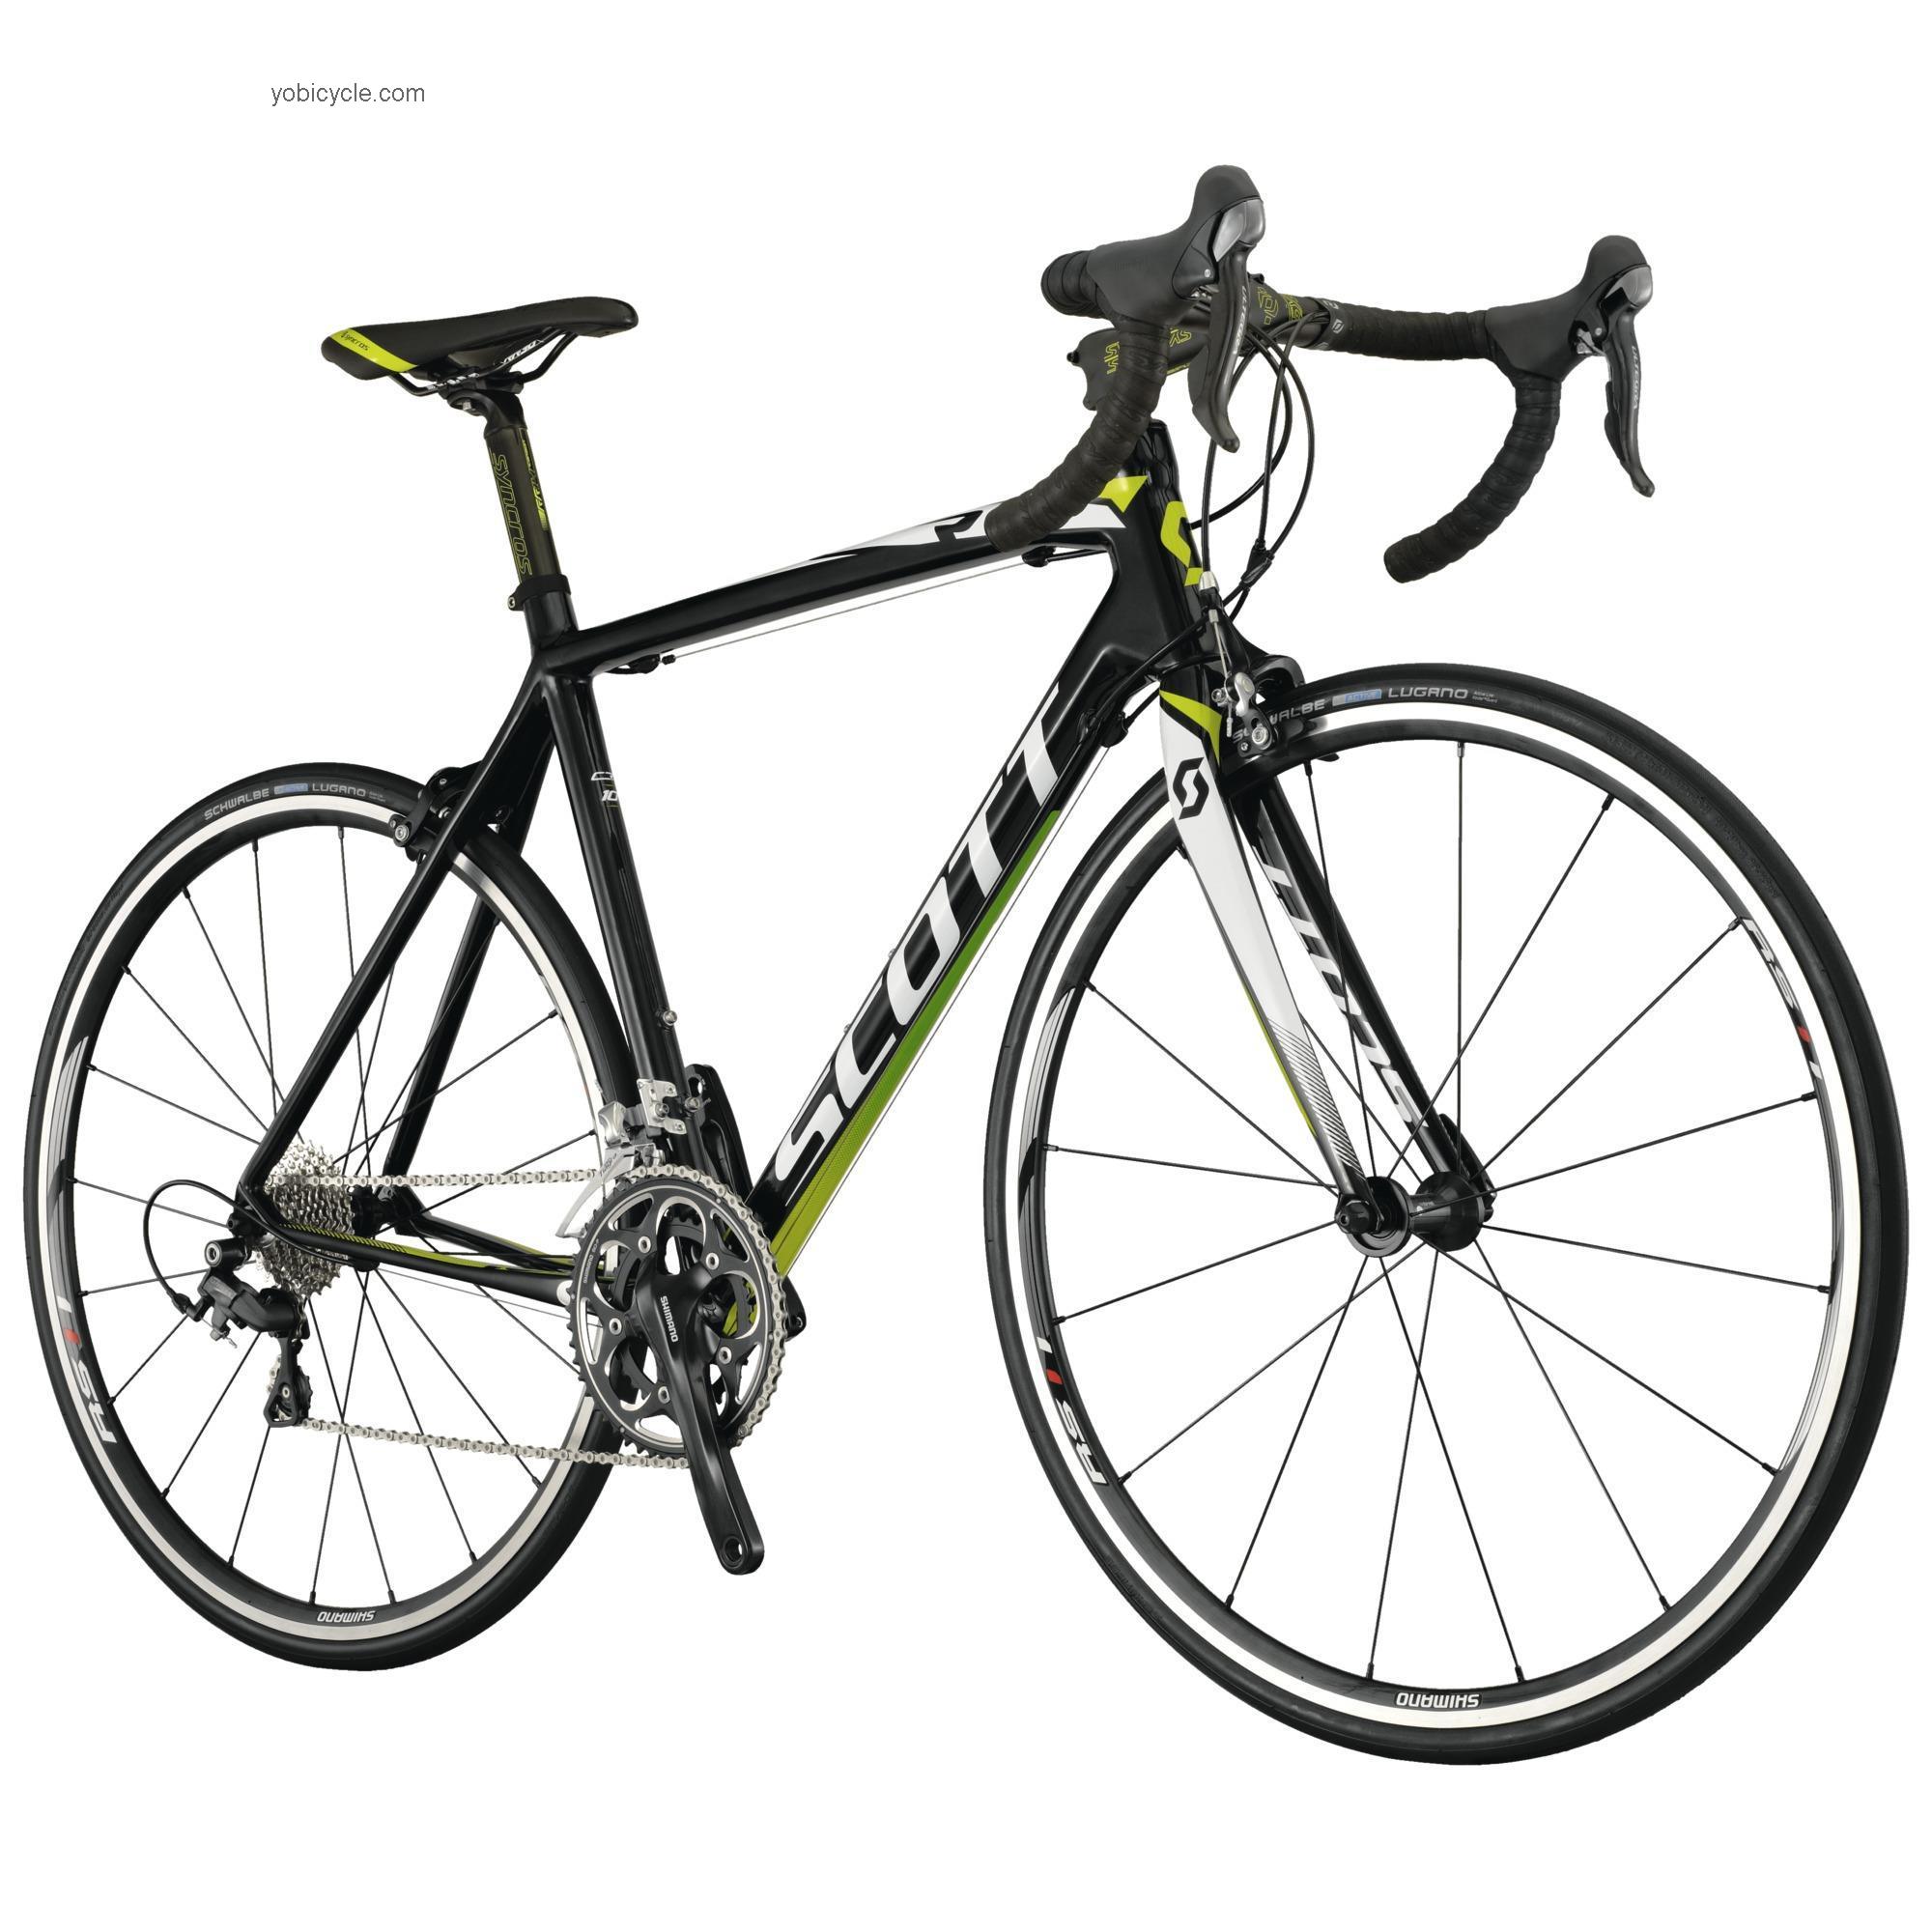 Scott  CR1 10 Technical data and specifications